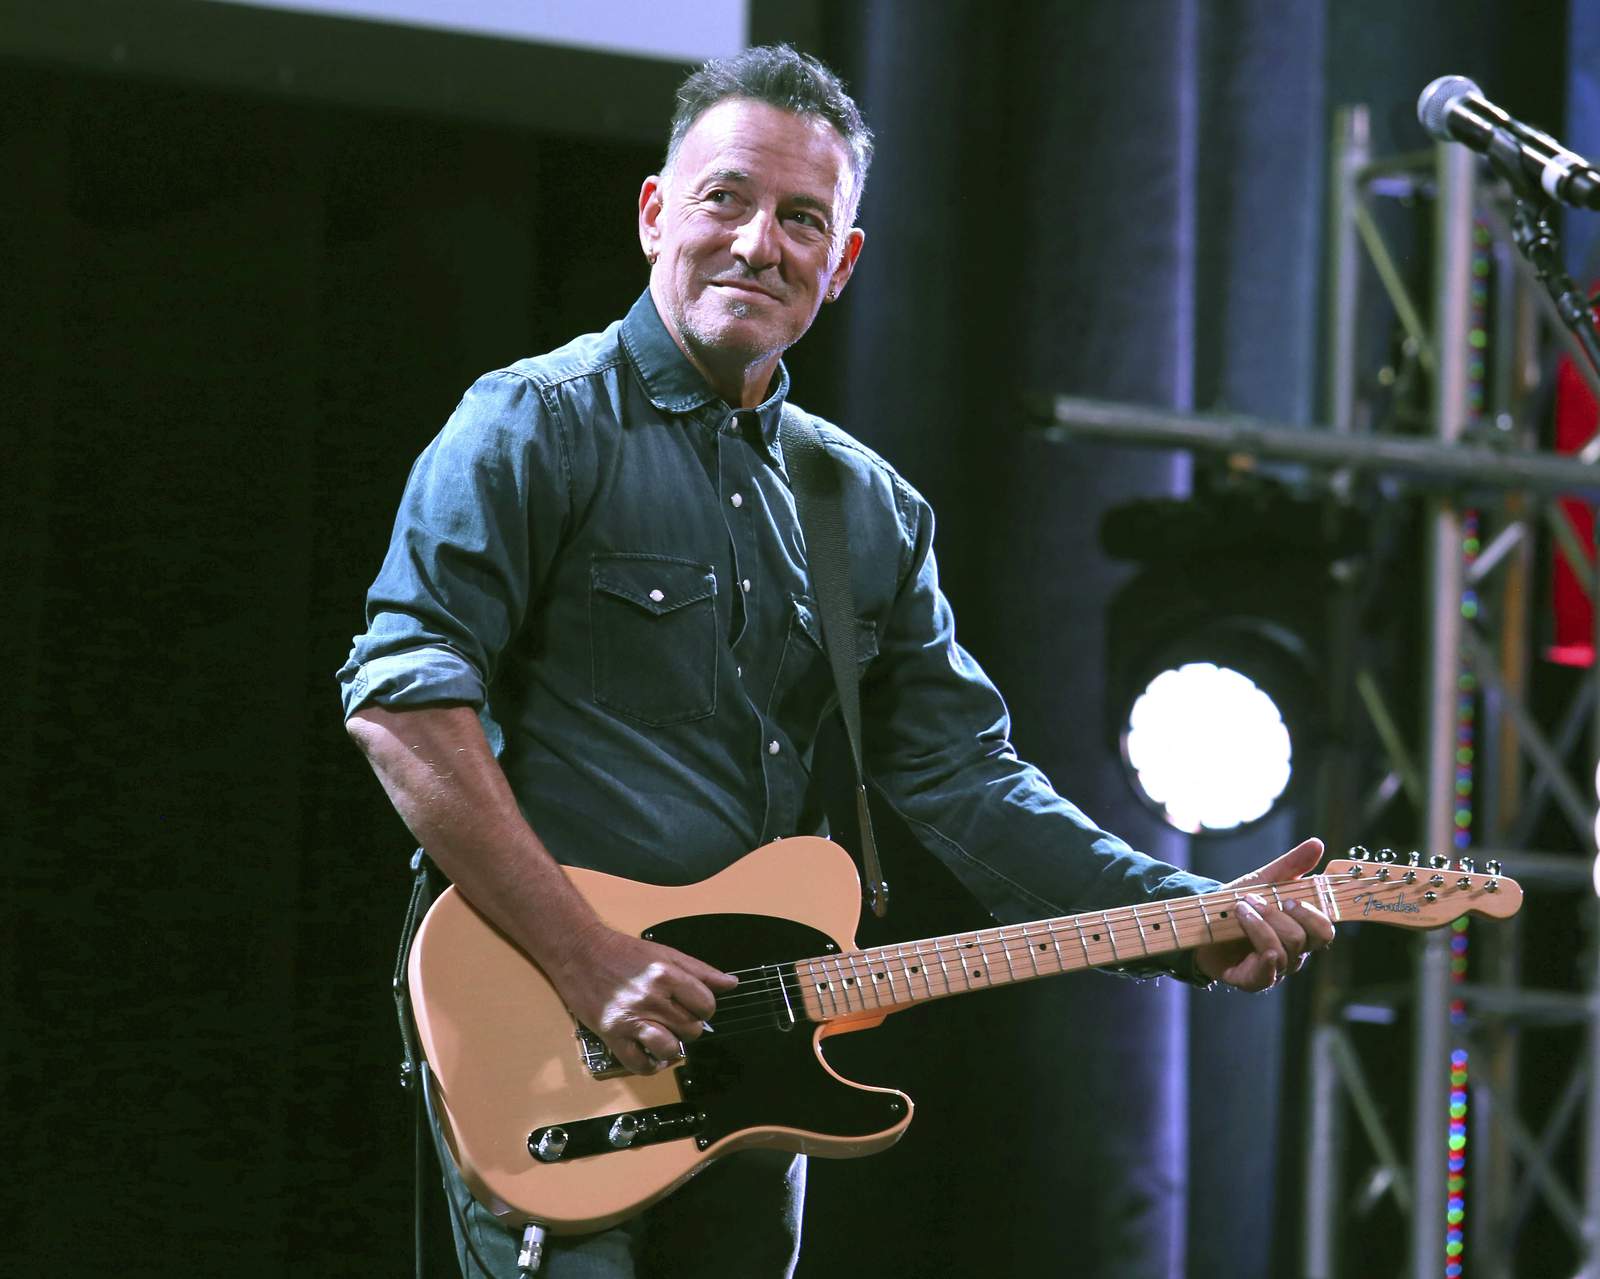 Springsteen wouldn't take breath test, court papers say